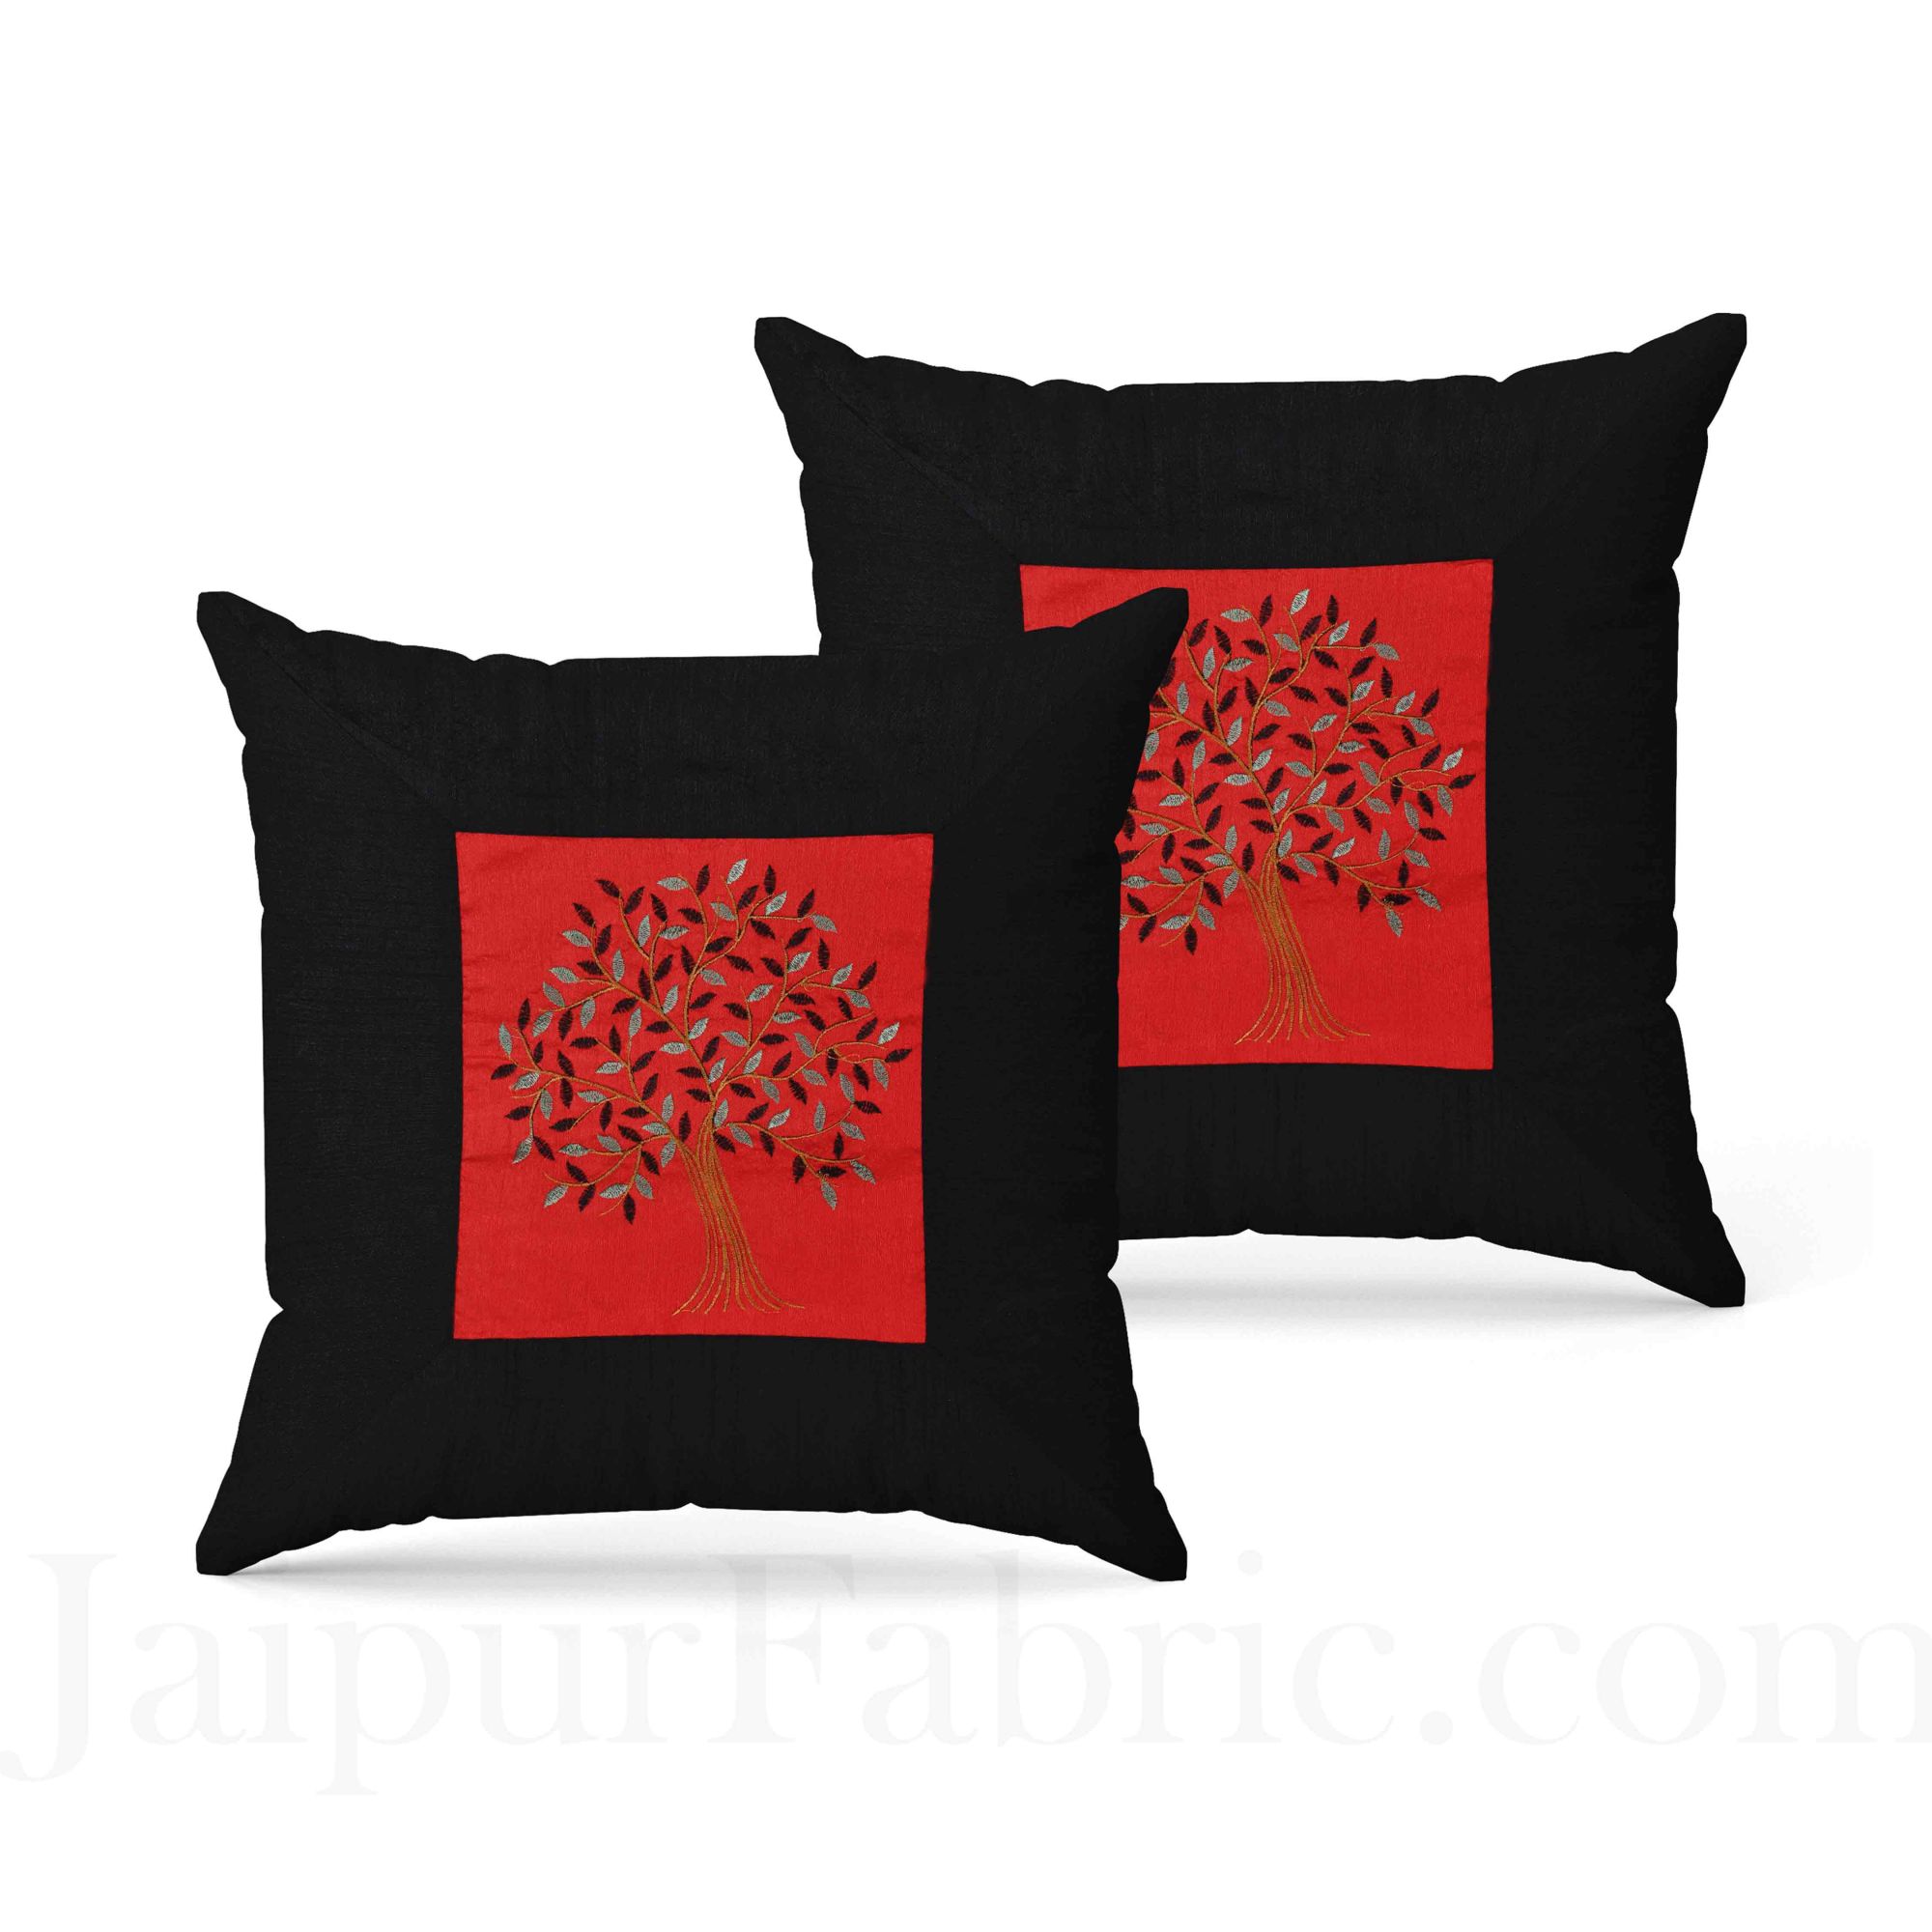 Red Base Machine Embroidery Black Patch Work Silk Double Bed Sheet